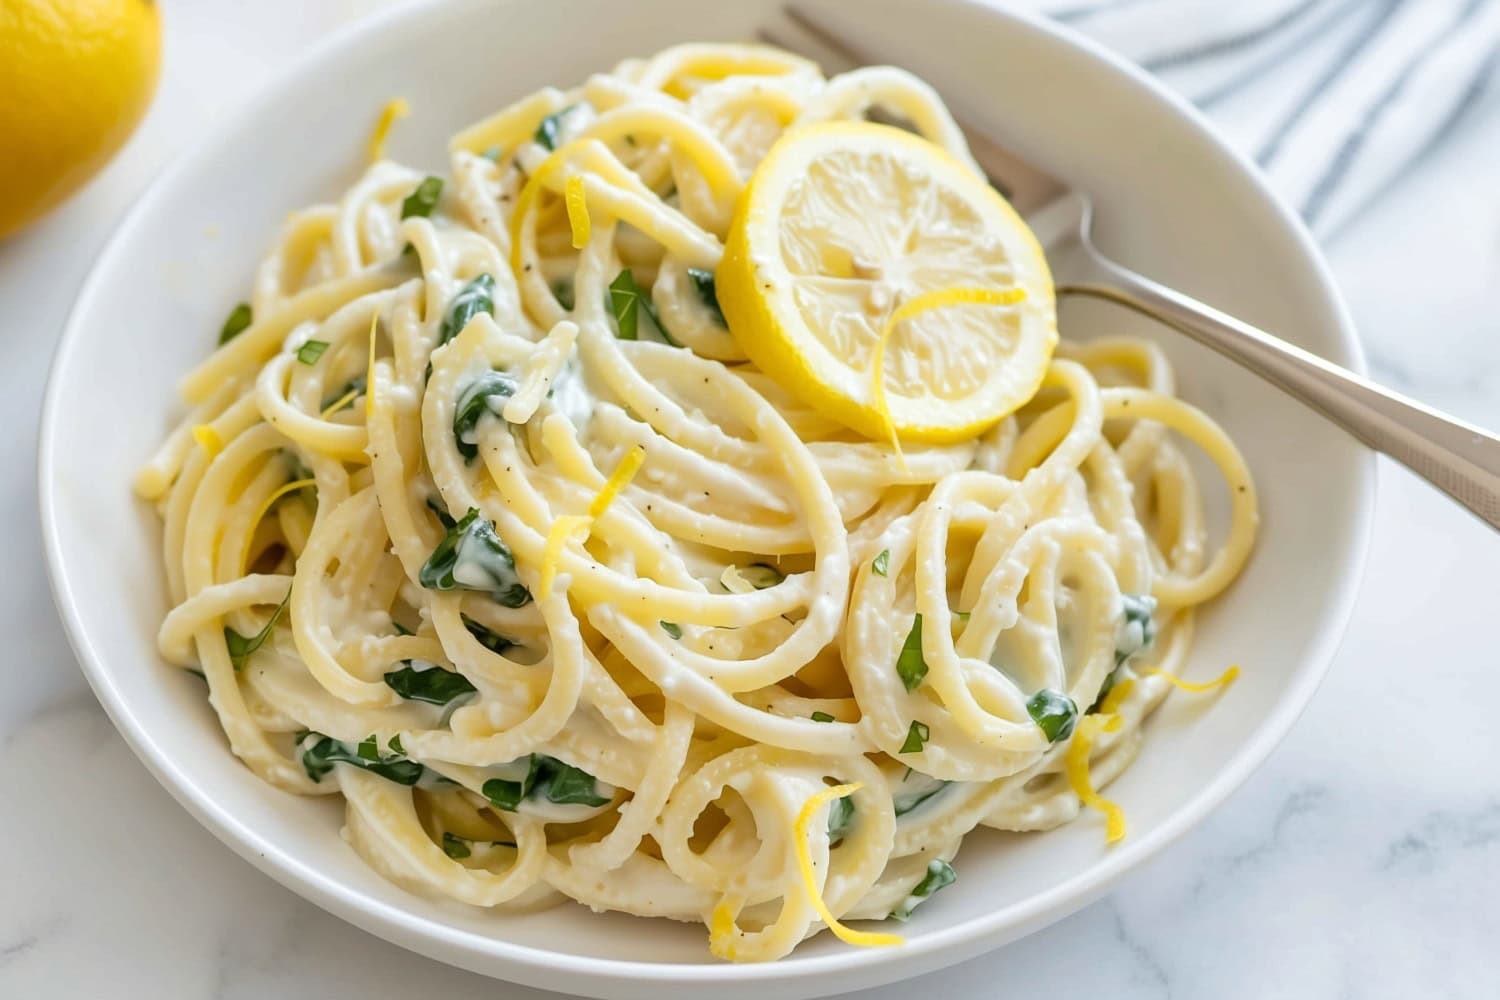 Citrusy and delicious lemon ricotta pasta with fork in a bowl ready to serve.